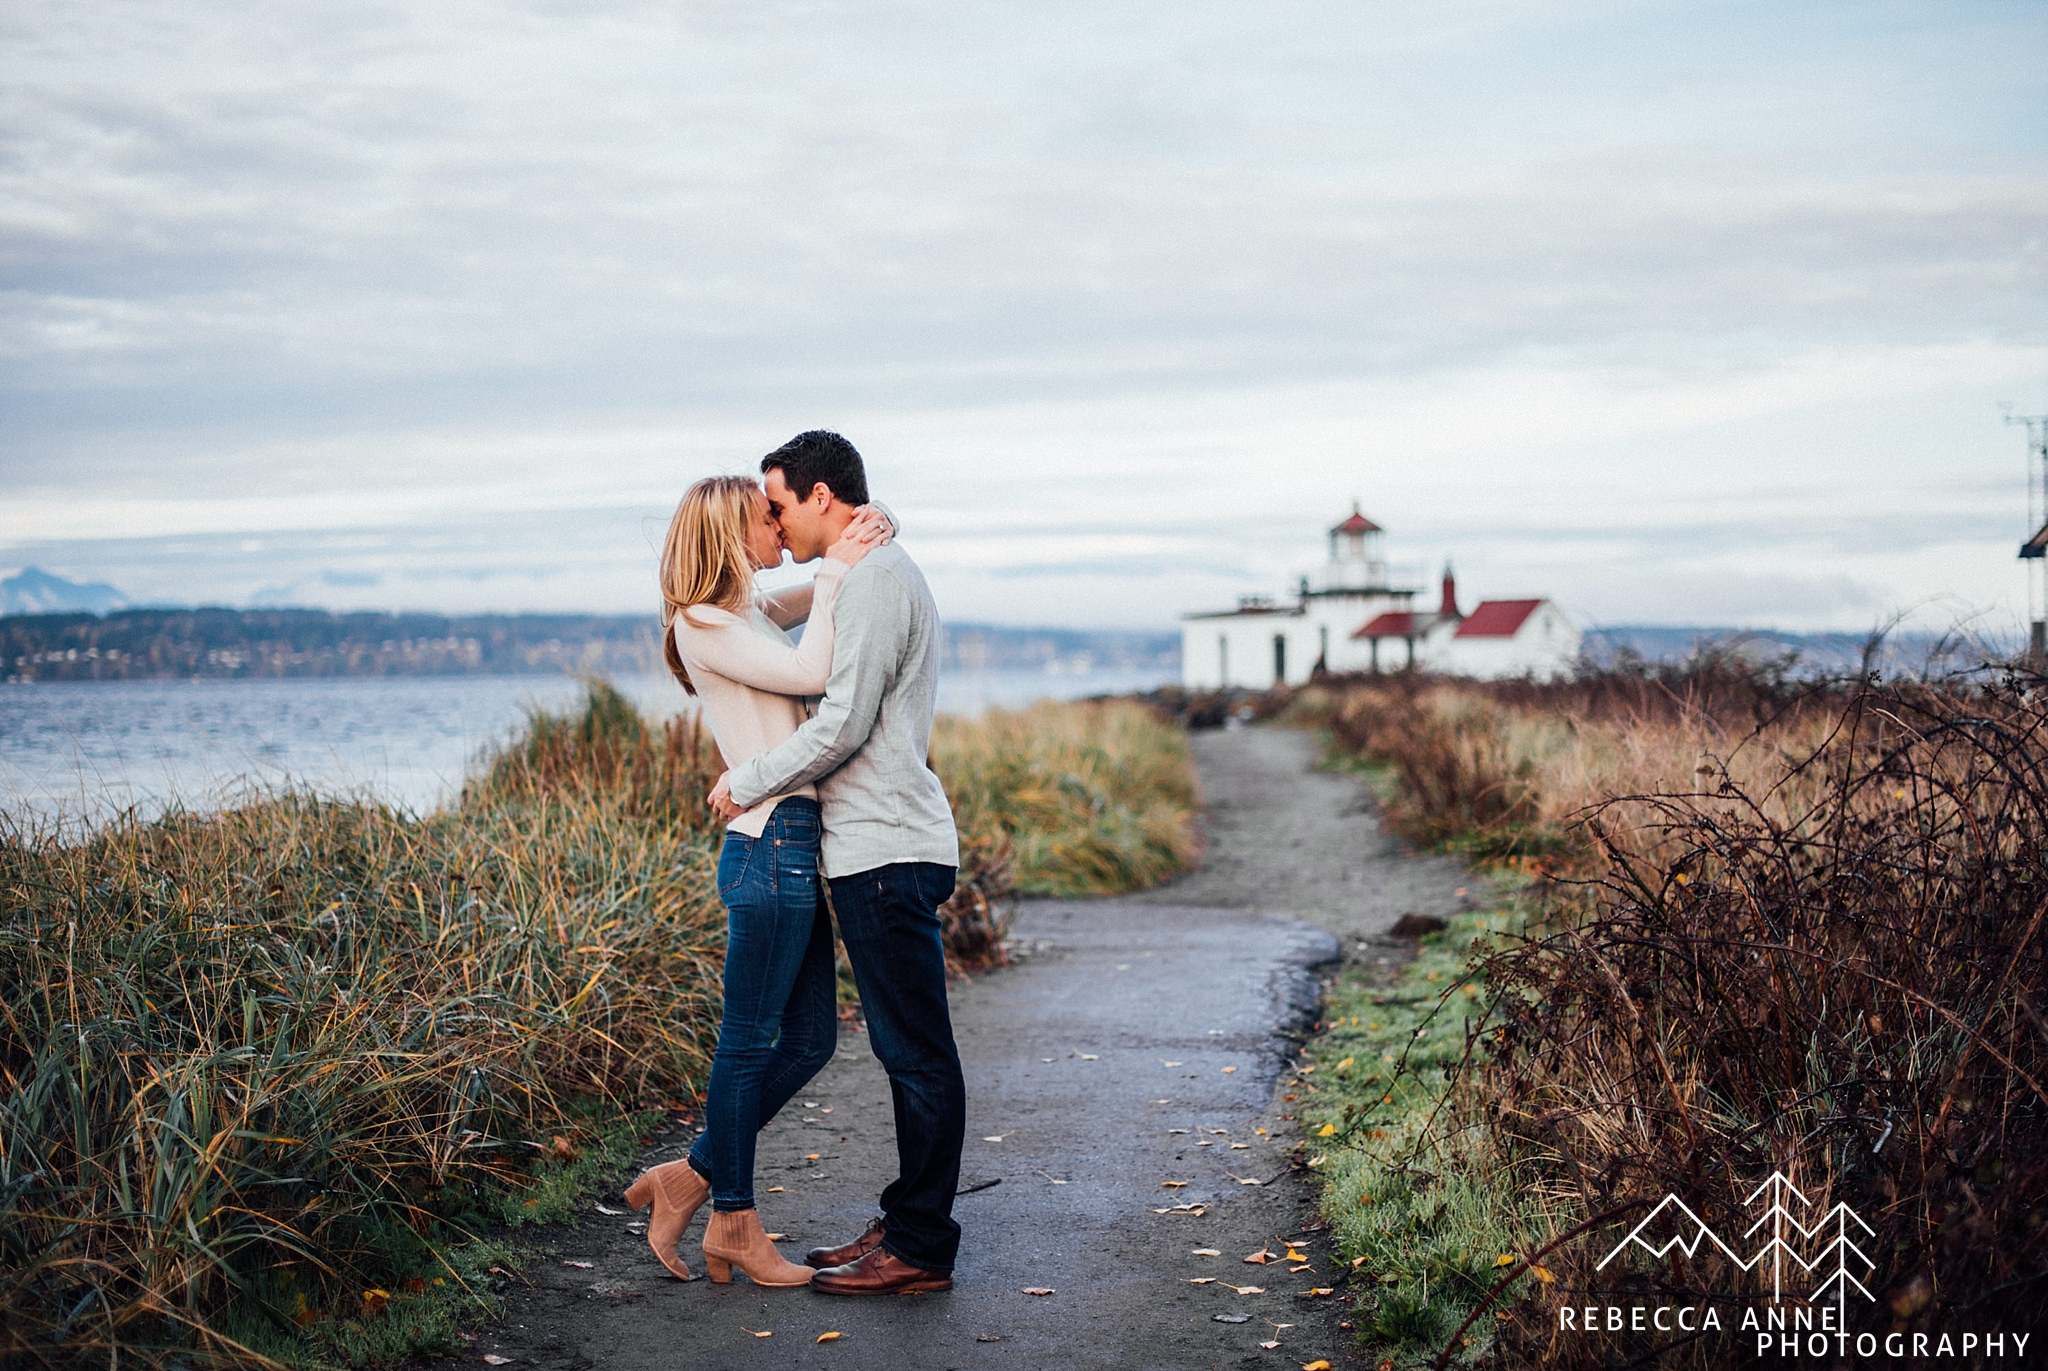 Discovery Park Engagement,Tacoma Engagement Photographer,Tacoma Engagement Photography,Seattle Engagement Photographer,Seattle Engagement Photography,Washington Engagement Photographer,Pacific Northwest Engagement Photographer,Seattle Engagement Photos,Tacoma Engagement Photos,